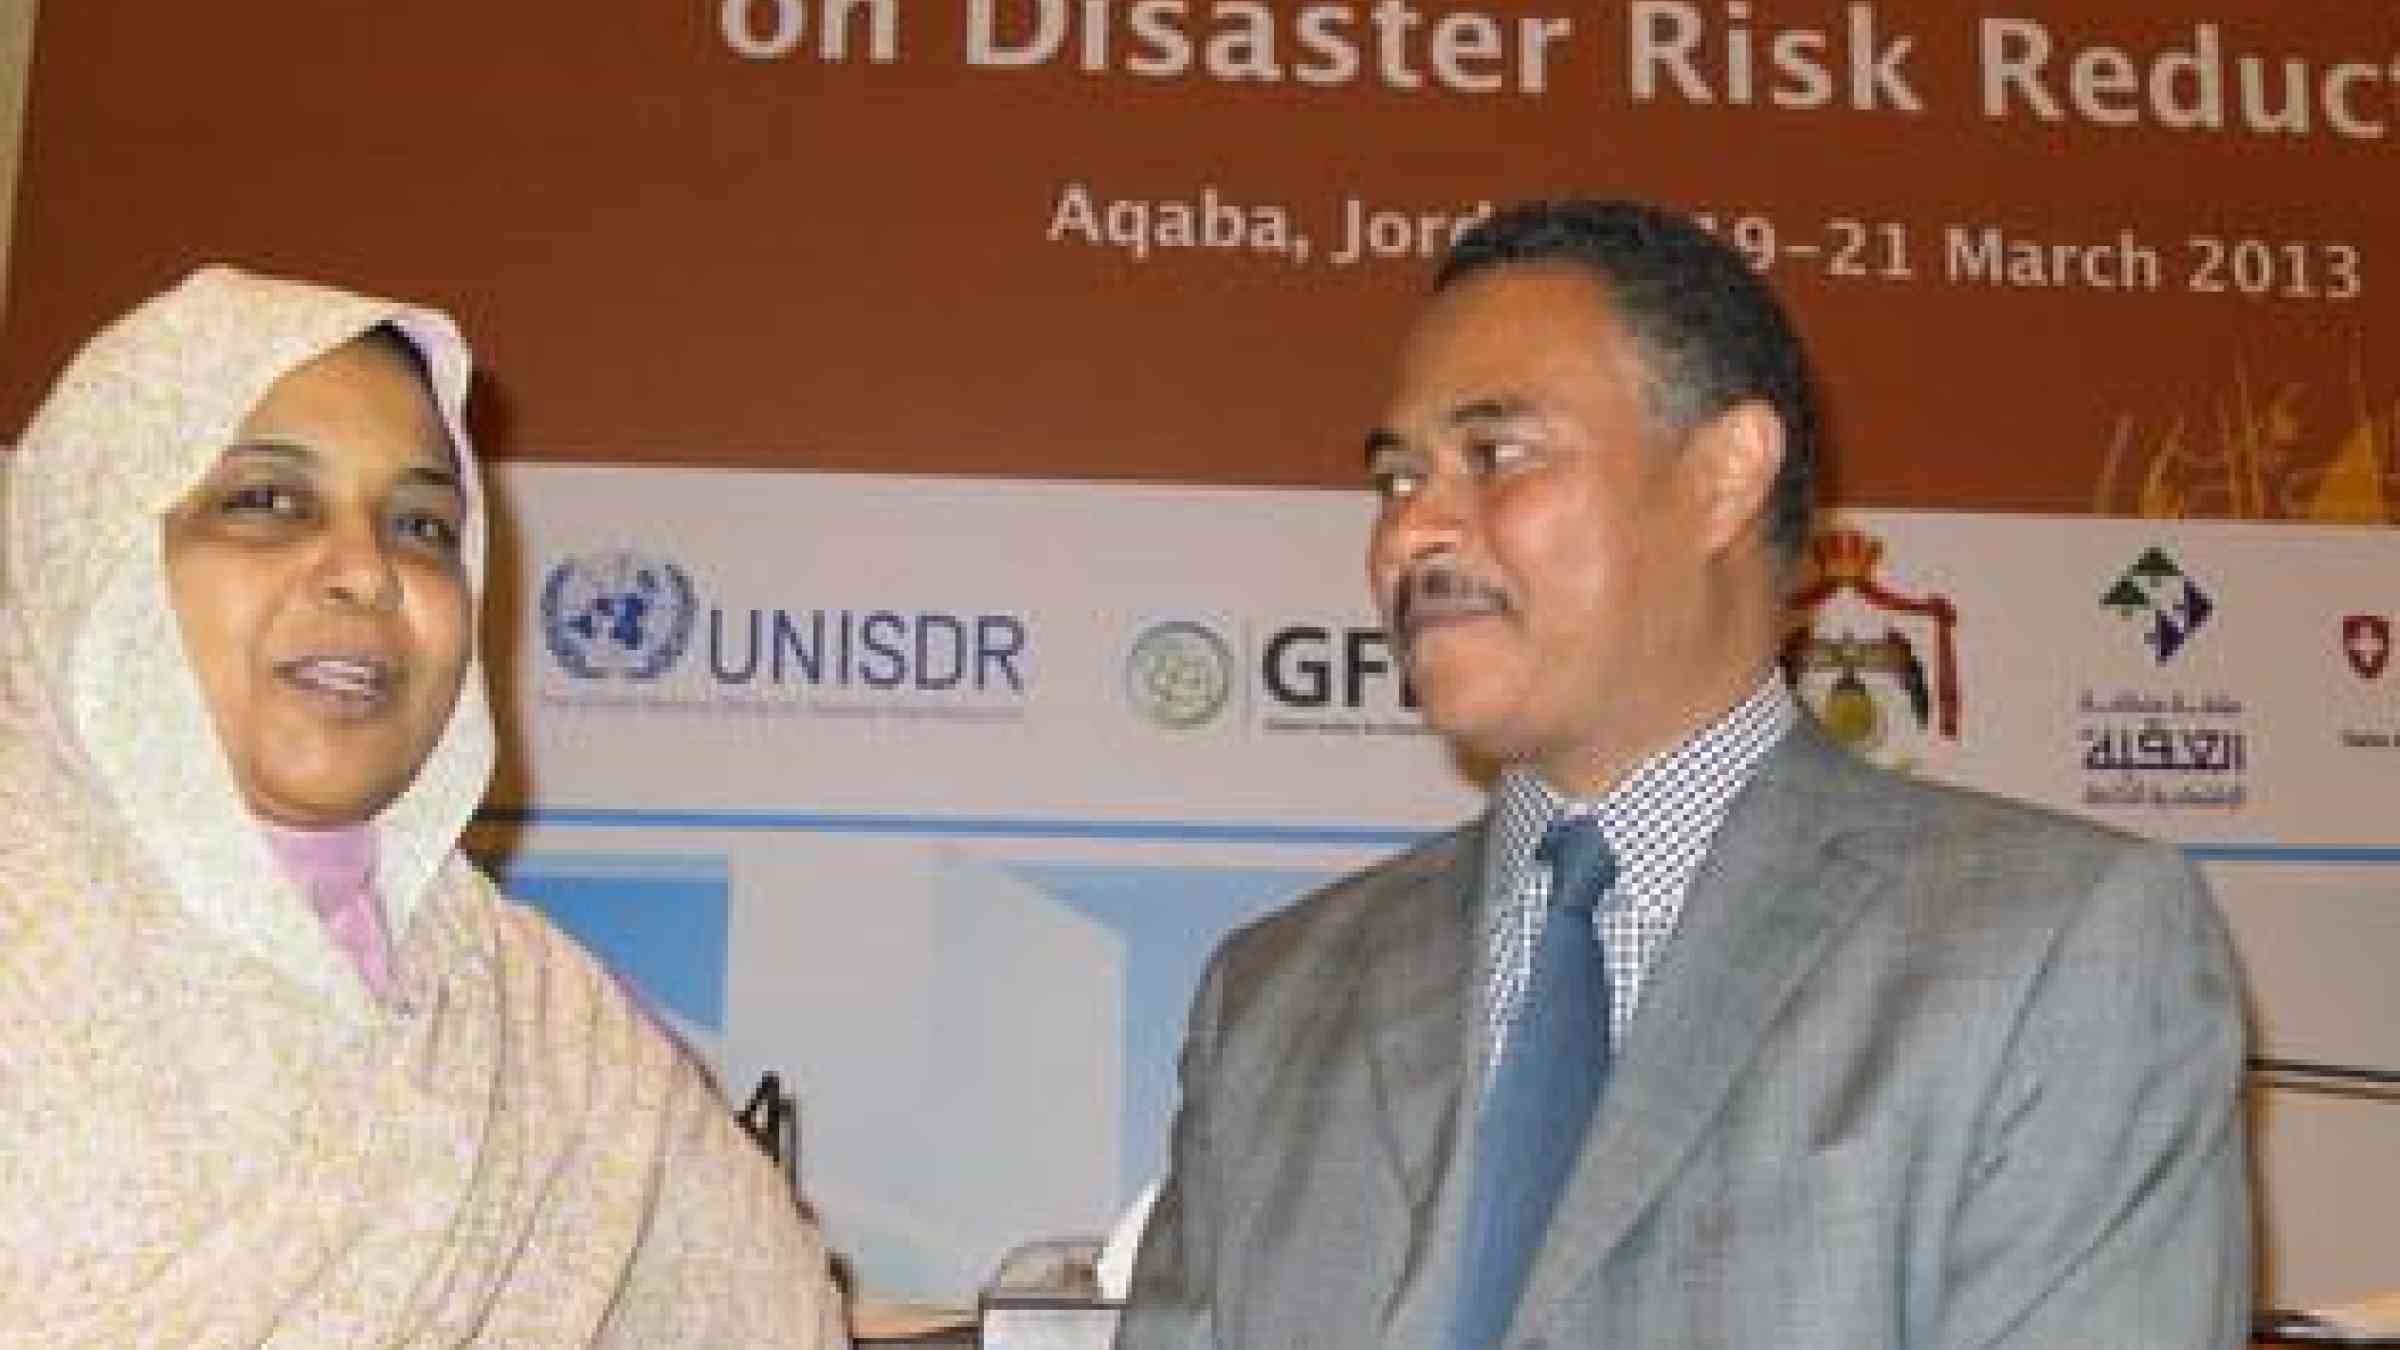 From left: Ambassador Shahira Wahbi of the League of Arab States with UNISDR Head of Office for the Arab States, Amjad Abbashar, at the closing today in Aqaba of the First Arab Regional Conference on Disaster Risk Reduction.